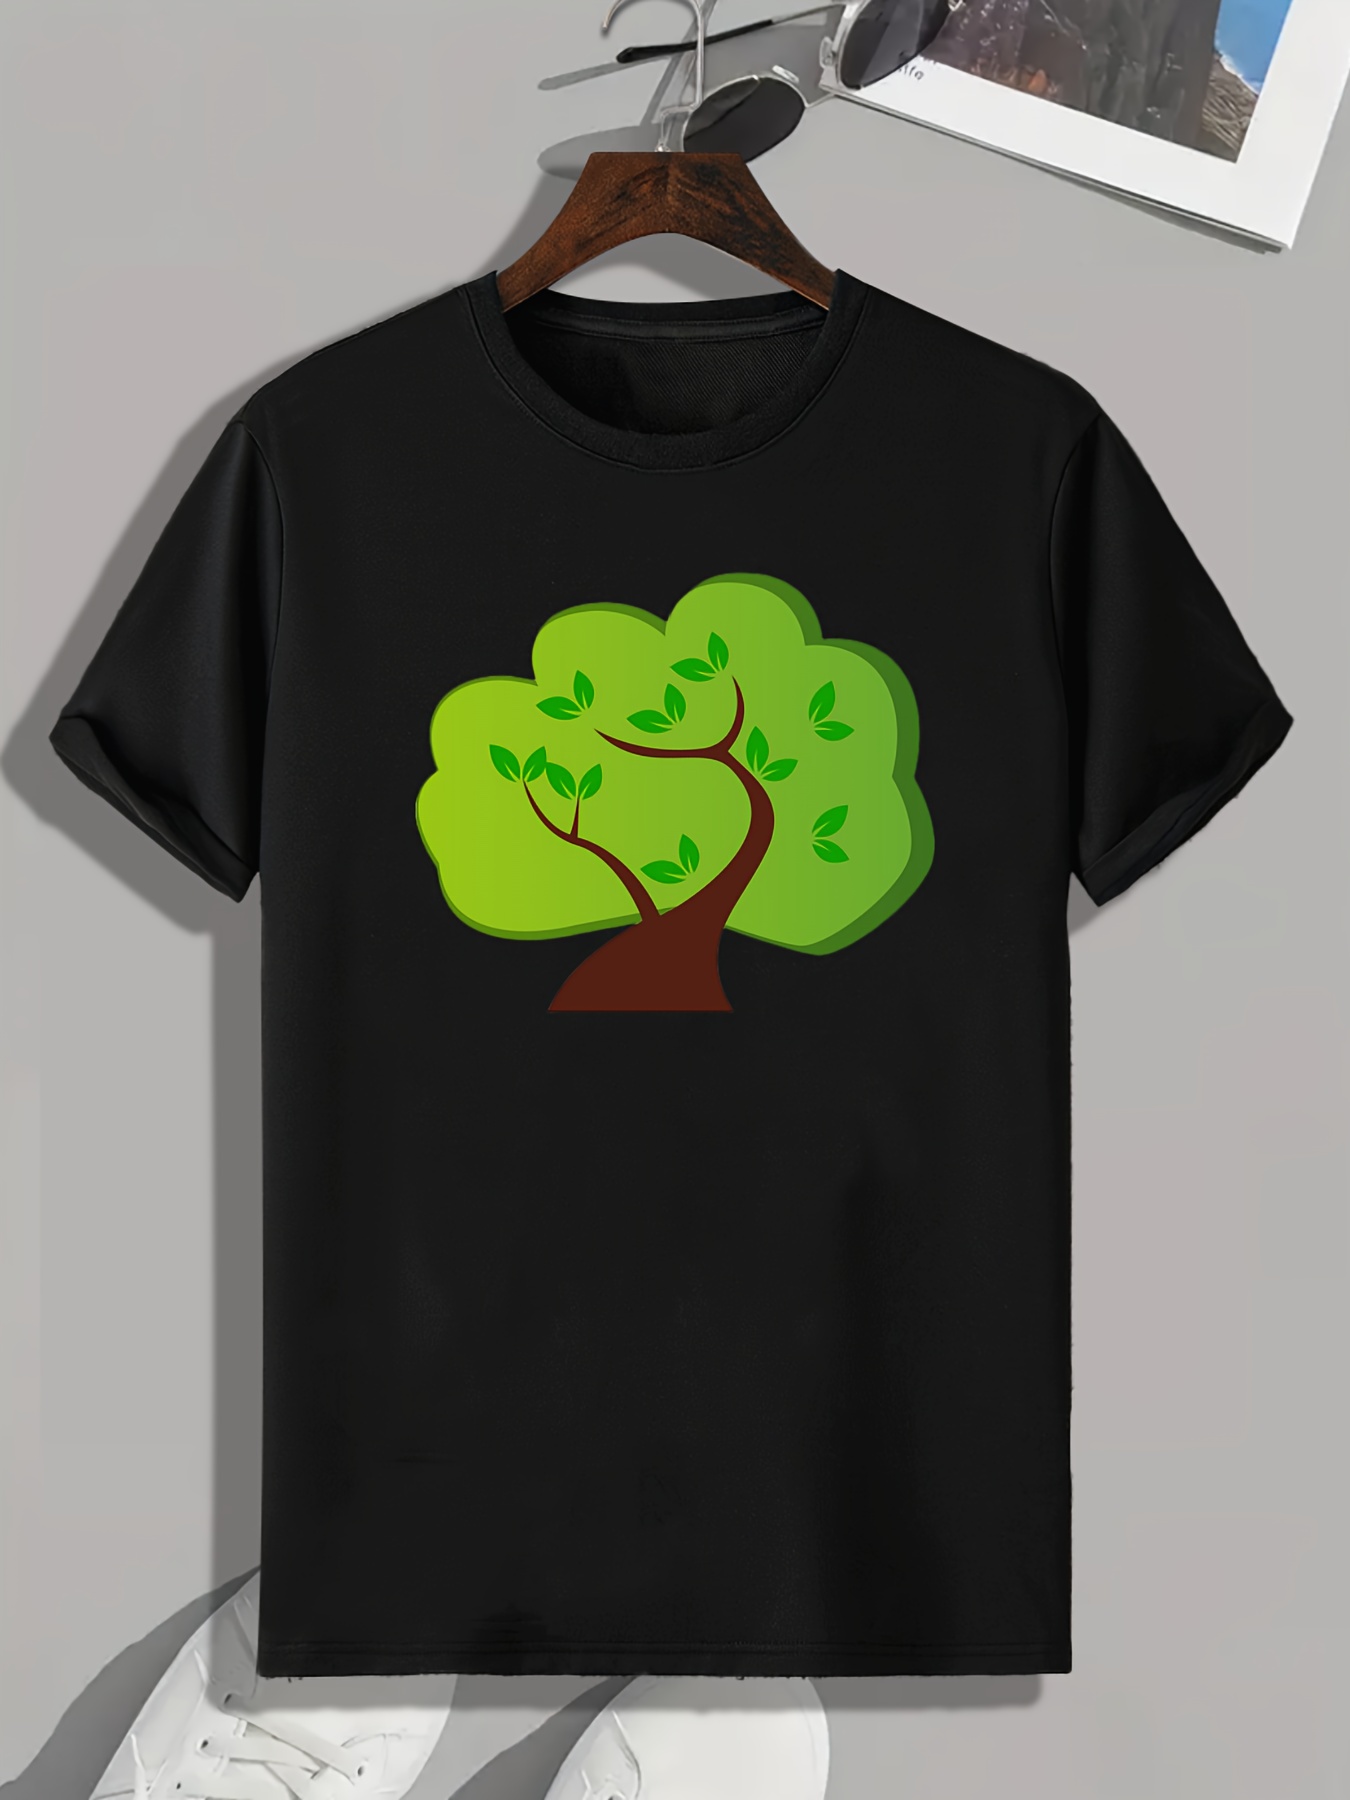 Green Tree Print, Men's Graphic T-shirt, Casual Comfy Tees For